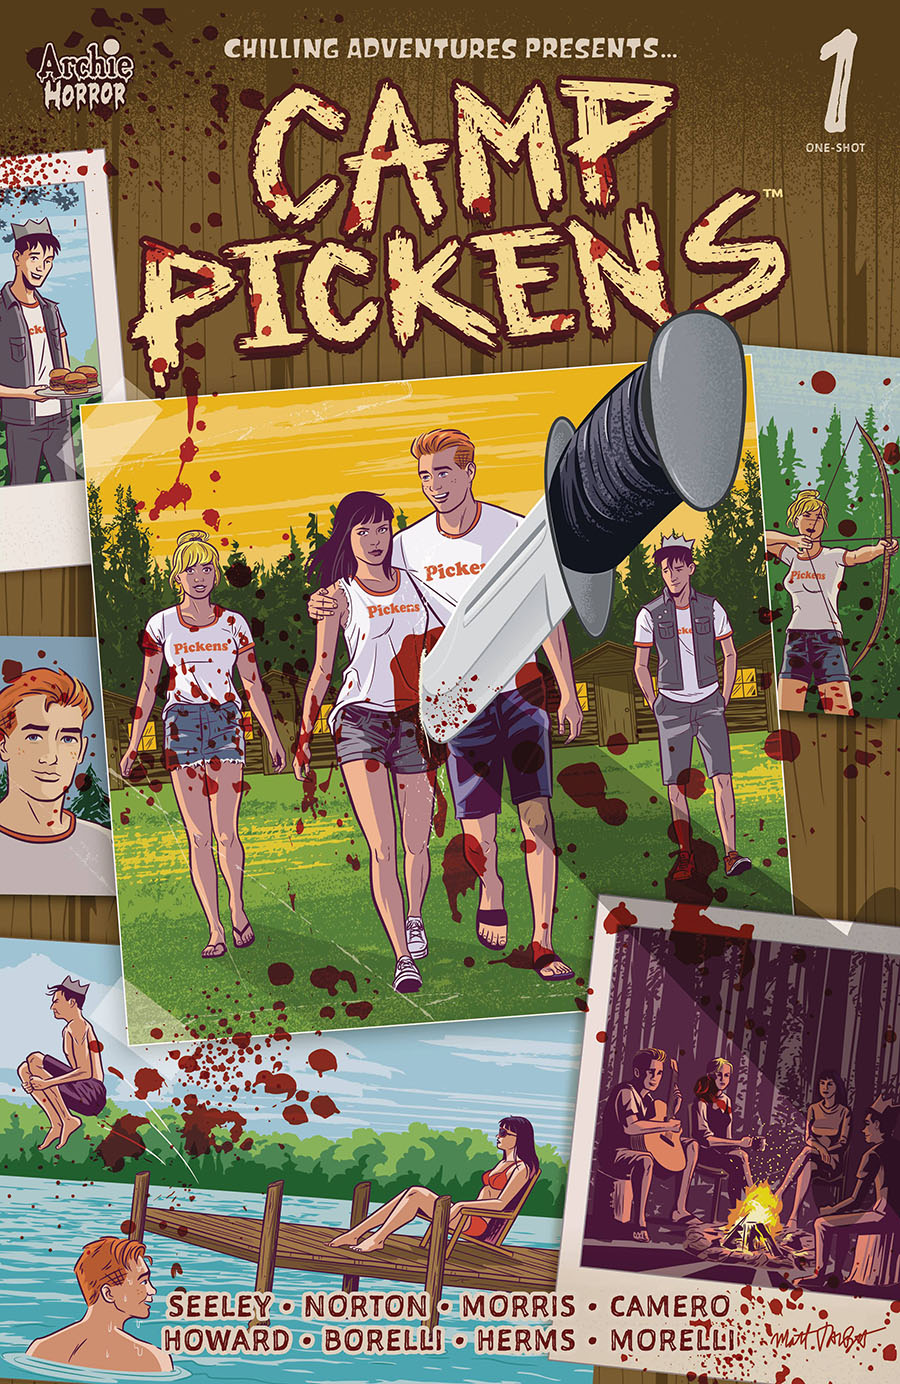 Chilling Adventures Presents Camp Pickens #1 (One Shot) Cover A Regular Matt Talbot Cover